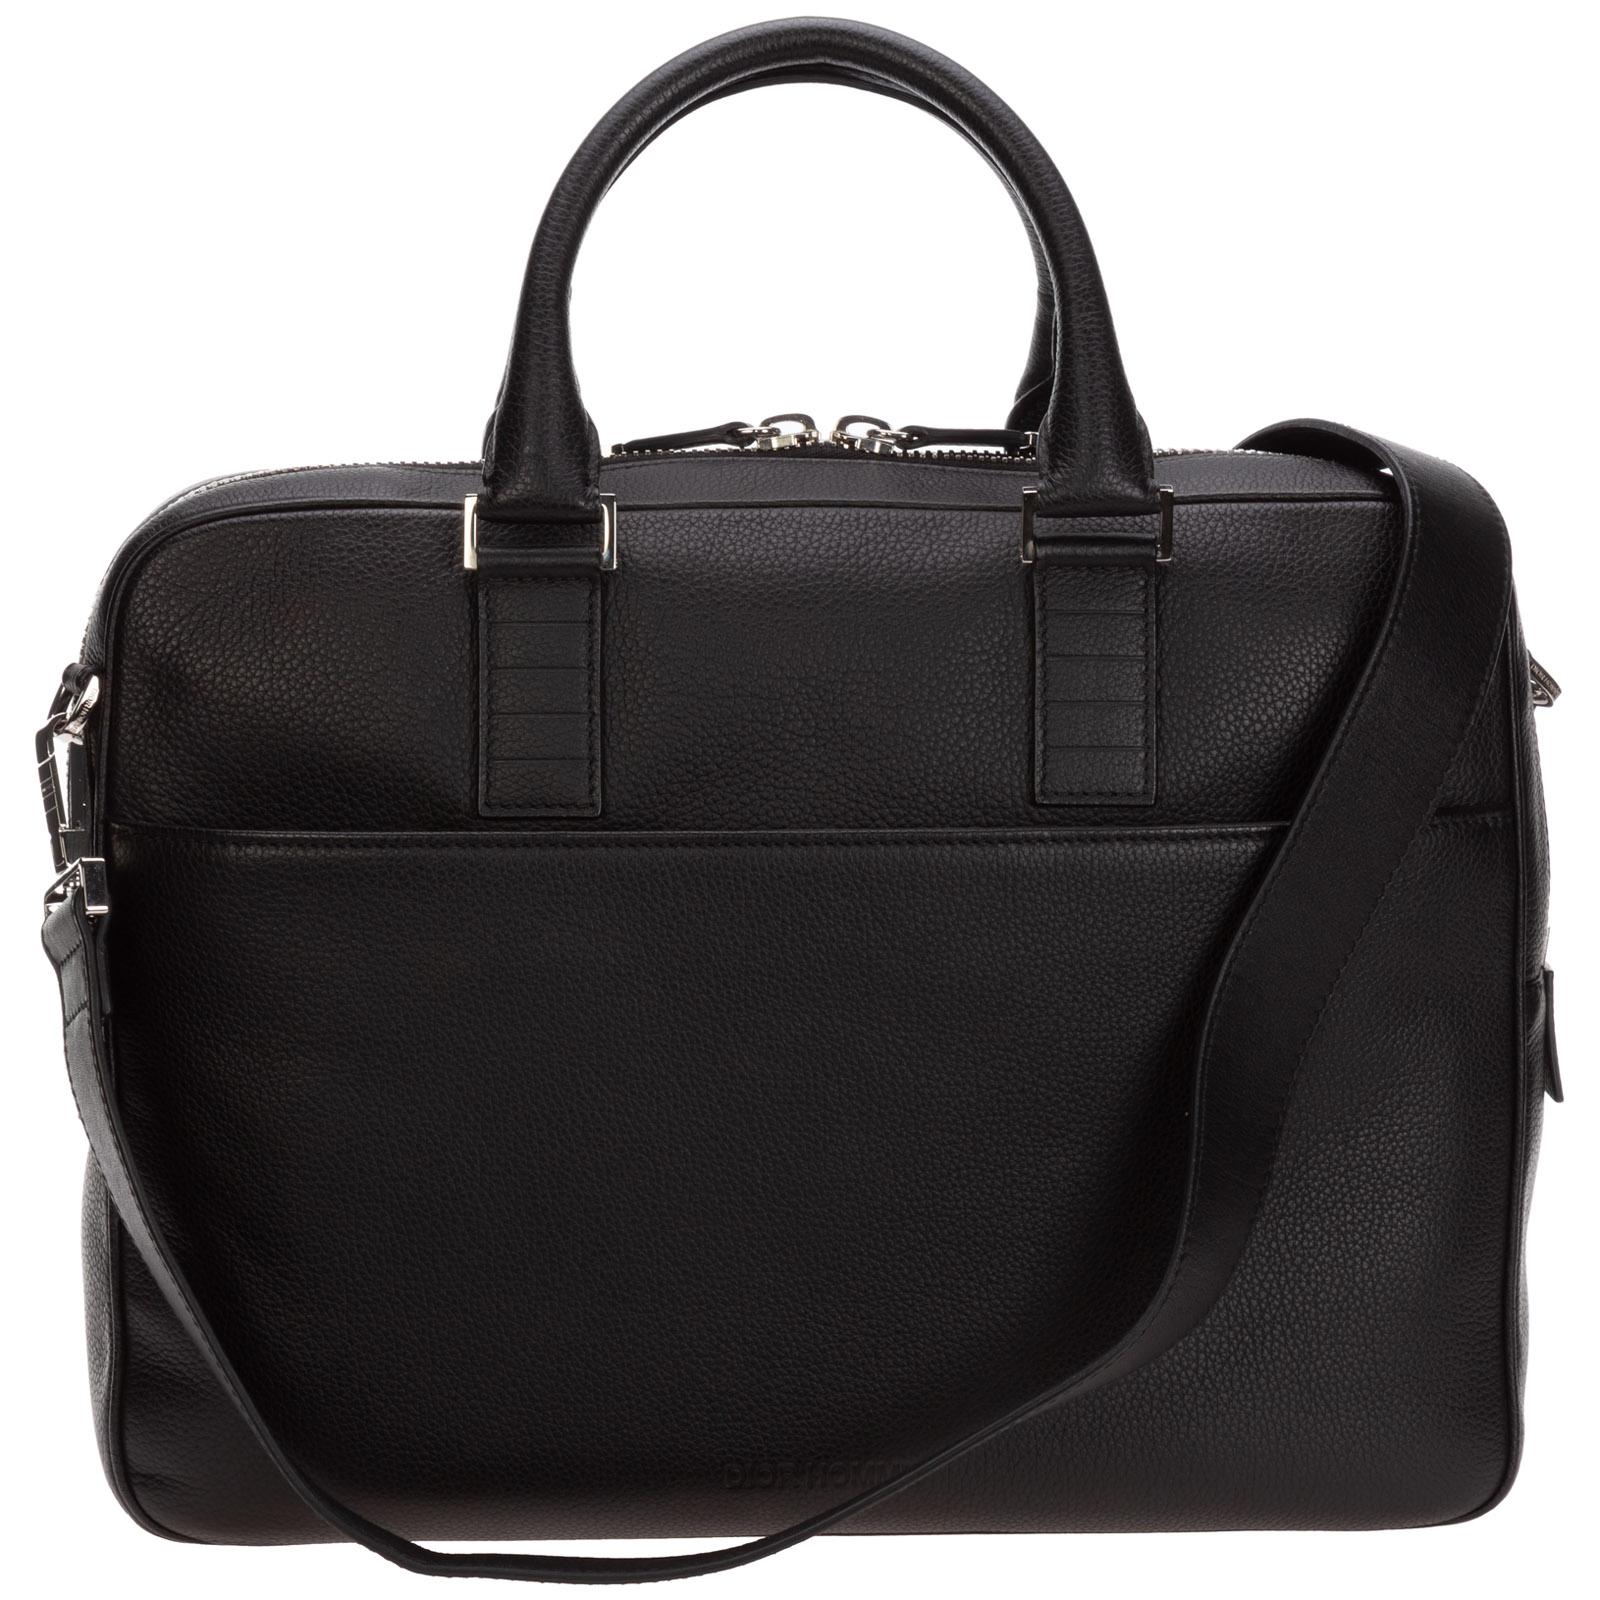 Dior Leather Double Handle Briefcase in Black for Men - Lyst